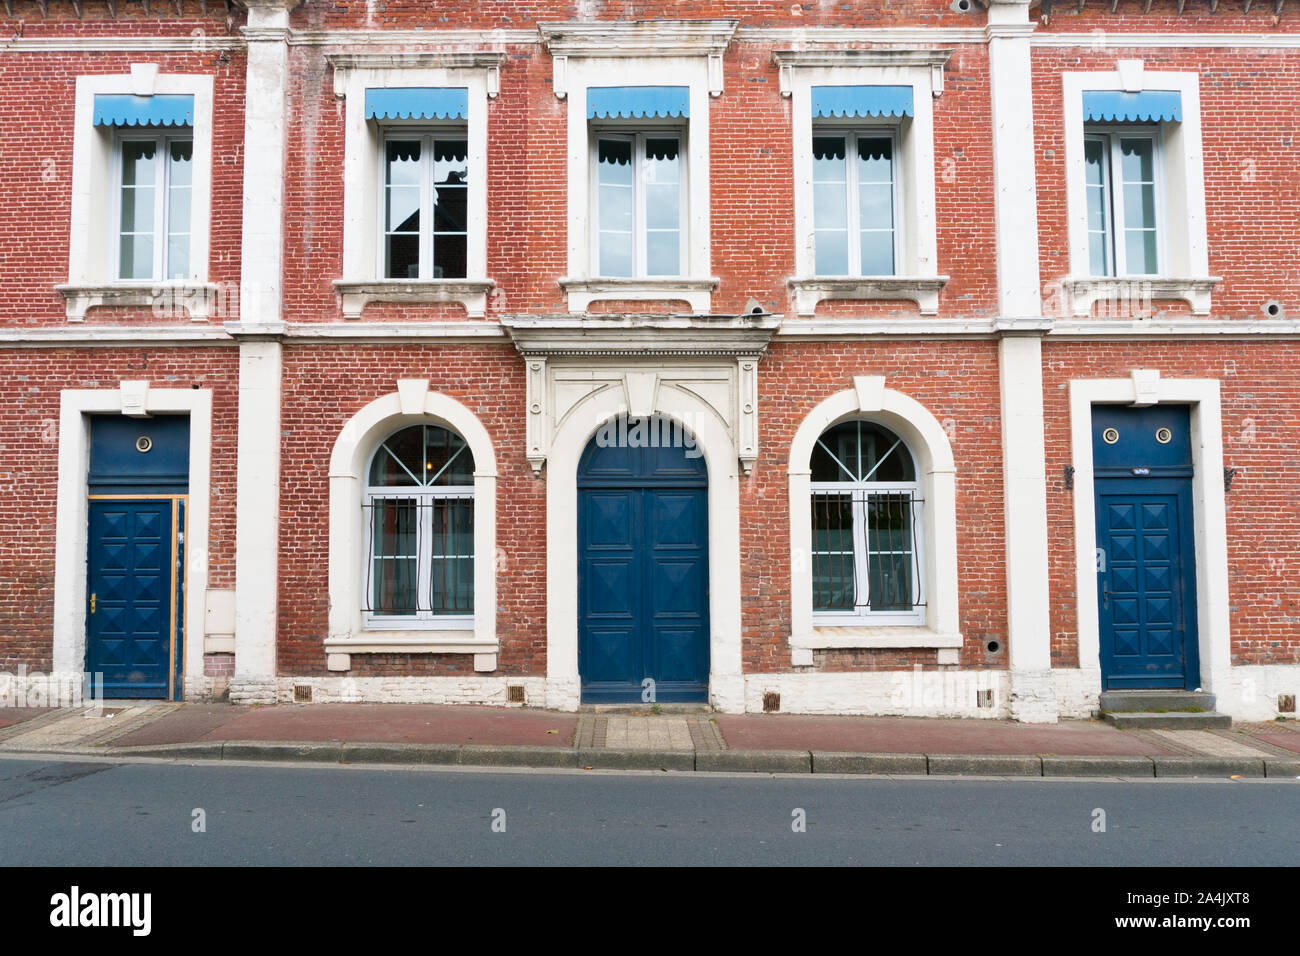 Etretat, Seine-Maritime / France - 14 August 2019: typical Norman stone and brick house front with colorful contrasts Stock Photo